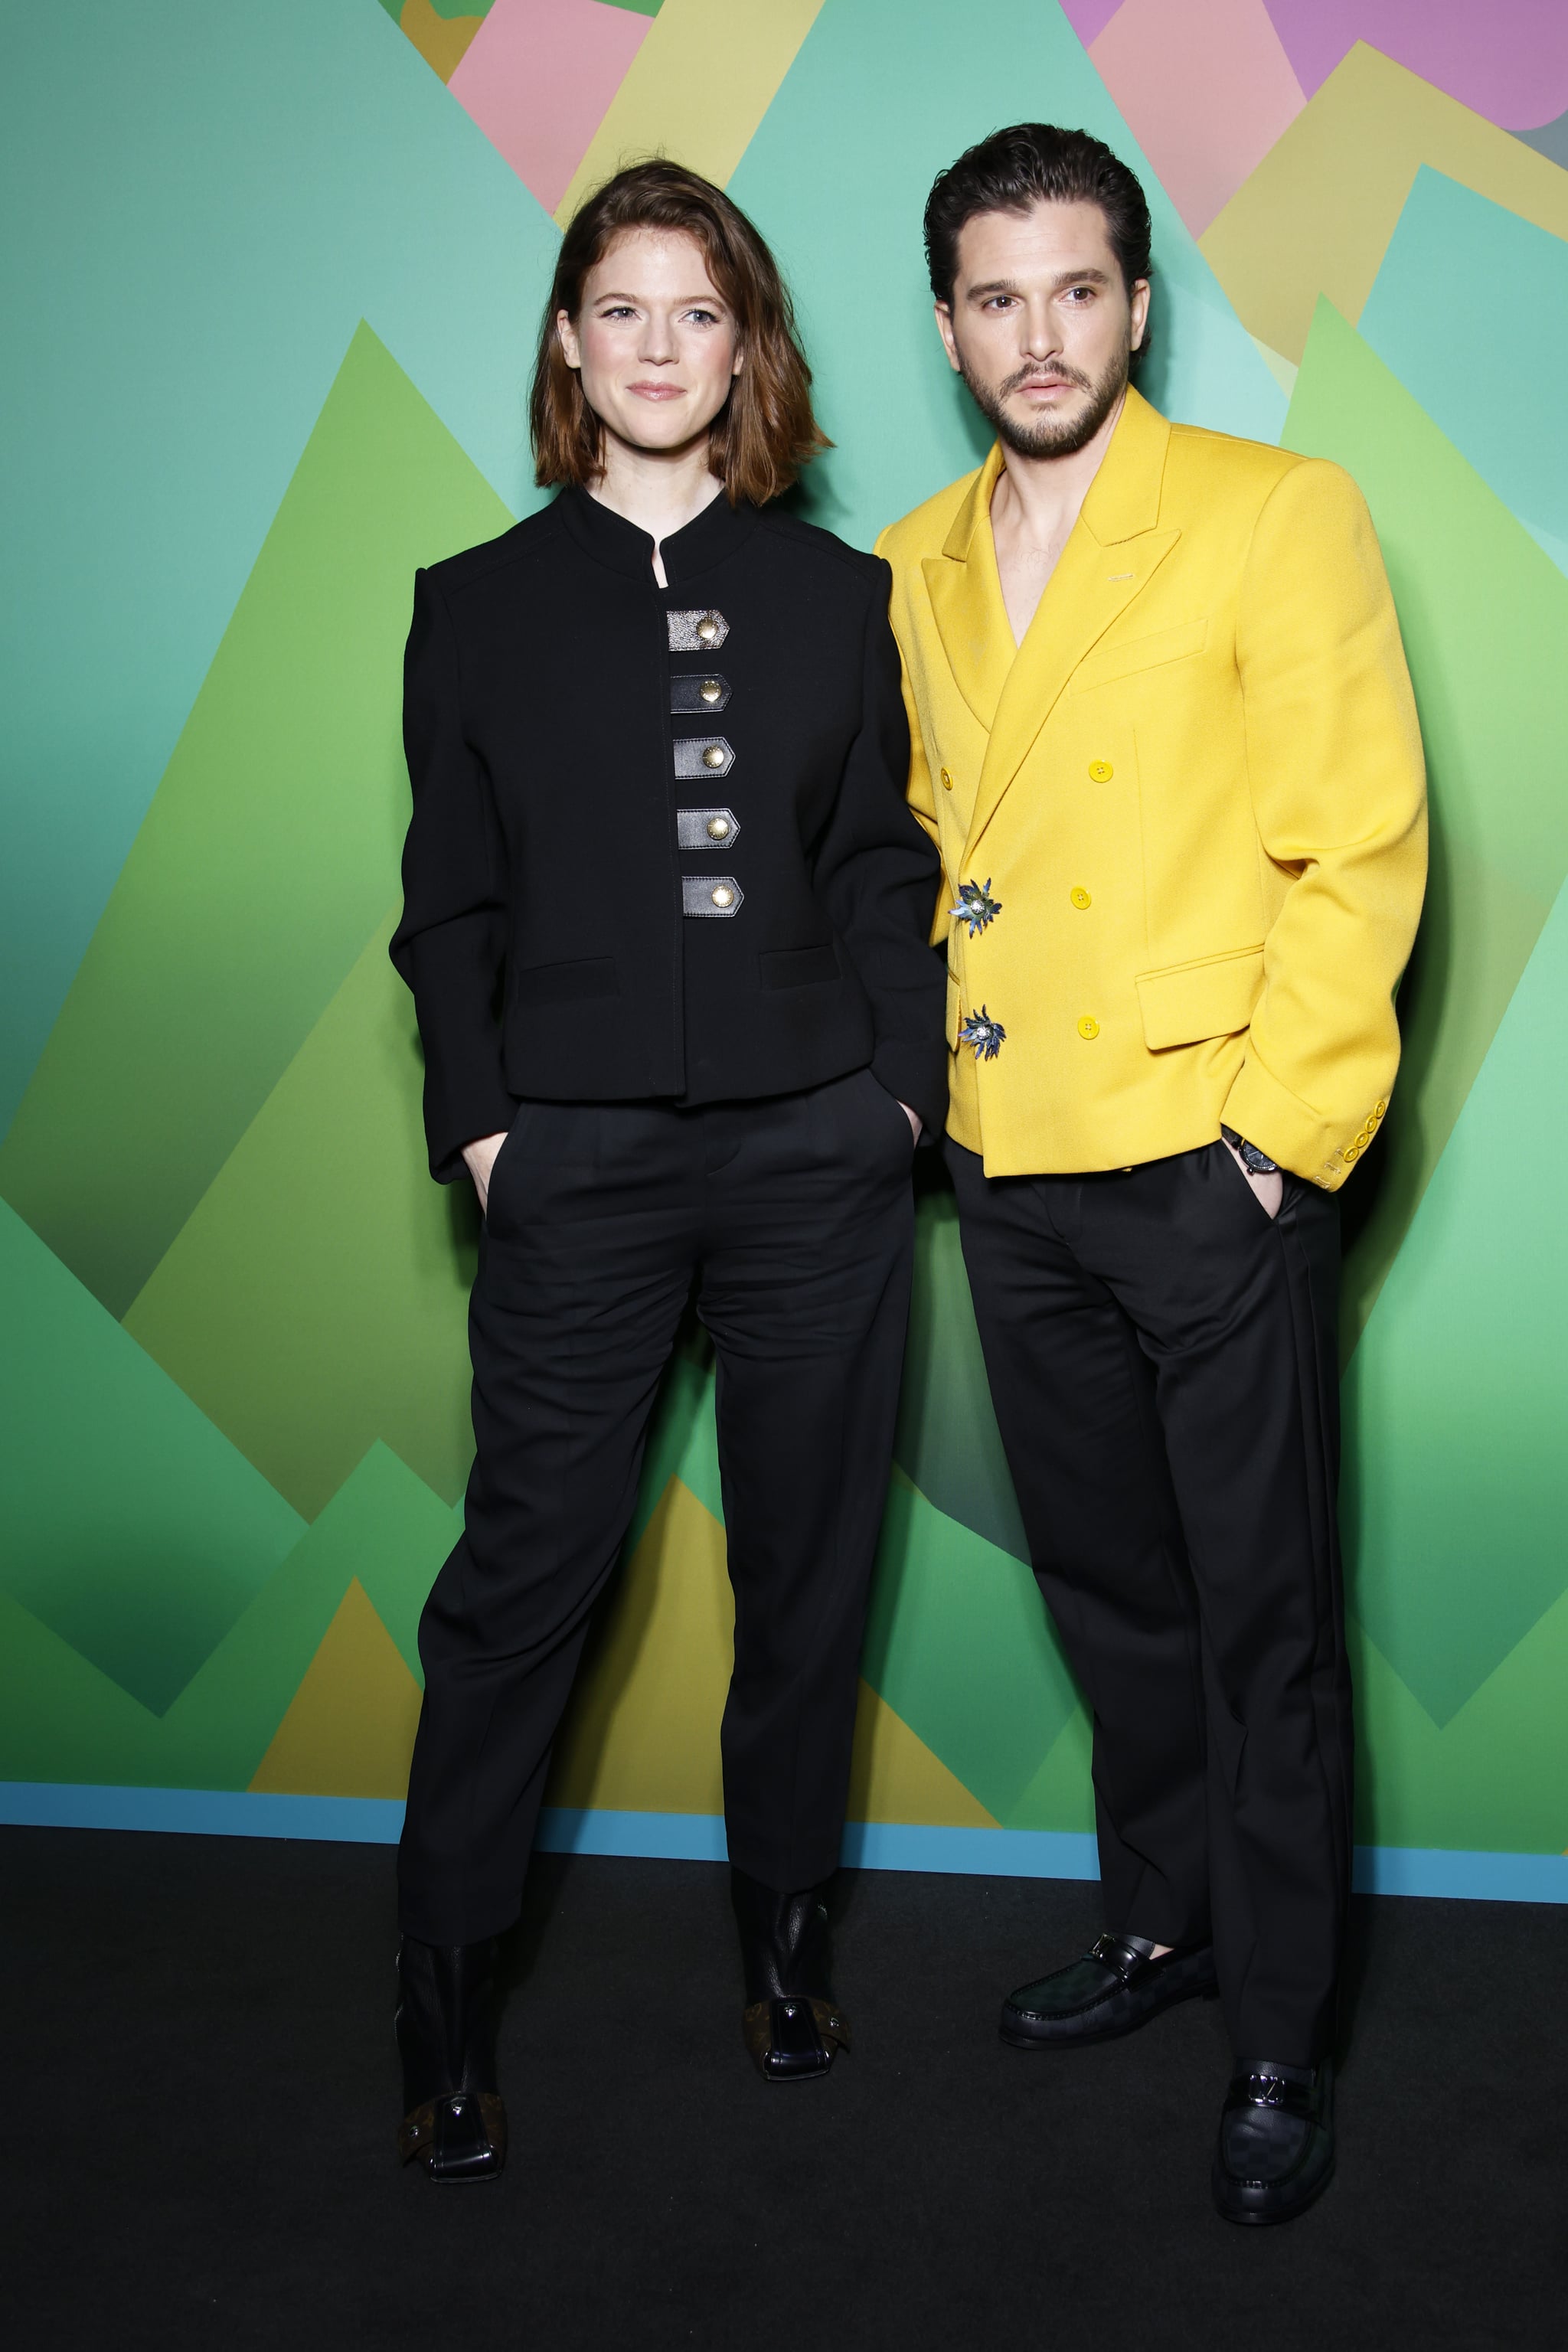 PARIS, FRANCE - JANUARY 19: (EDITORIAL USE ONLY - For Non-Editorial use please seek approval from Fashion House) Rose Leslie and Kit Harington attend the Louis Vuitton Menswear Fall-Winter 2023-2024 show as part of Paris Fashion Week  on January 19, 2023 in Paris, France. (Photo by Julien Hekimian/Getty Images)